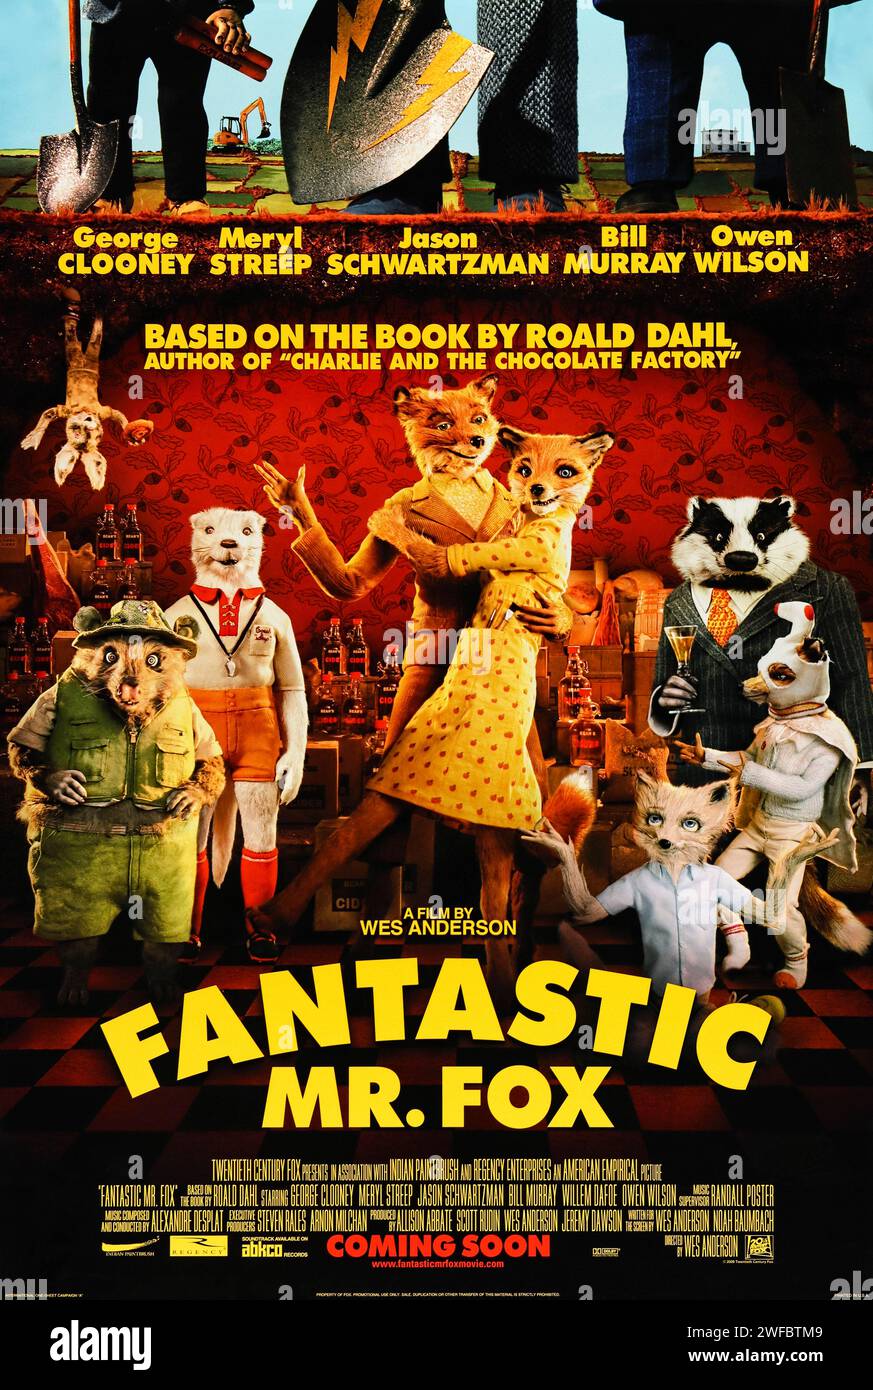 Fantastic Mr. Fox (2009) directed by Wes Anderson and starring George Clooney, Meryl Streep and Bill Murray. An urbane fox cannot resist returning to his farm raiding ways and then must help his community survive the farmers' retaliation. Photograph of an original 2009 US advance poster. ***EDITORIAL USE ONLY*** Credit: BFA / Twentieth Century Fox Stock Photo